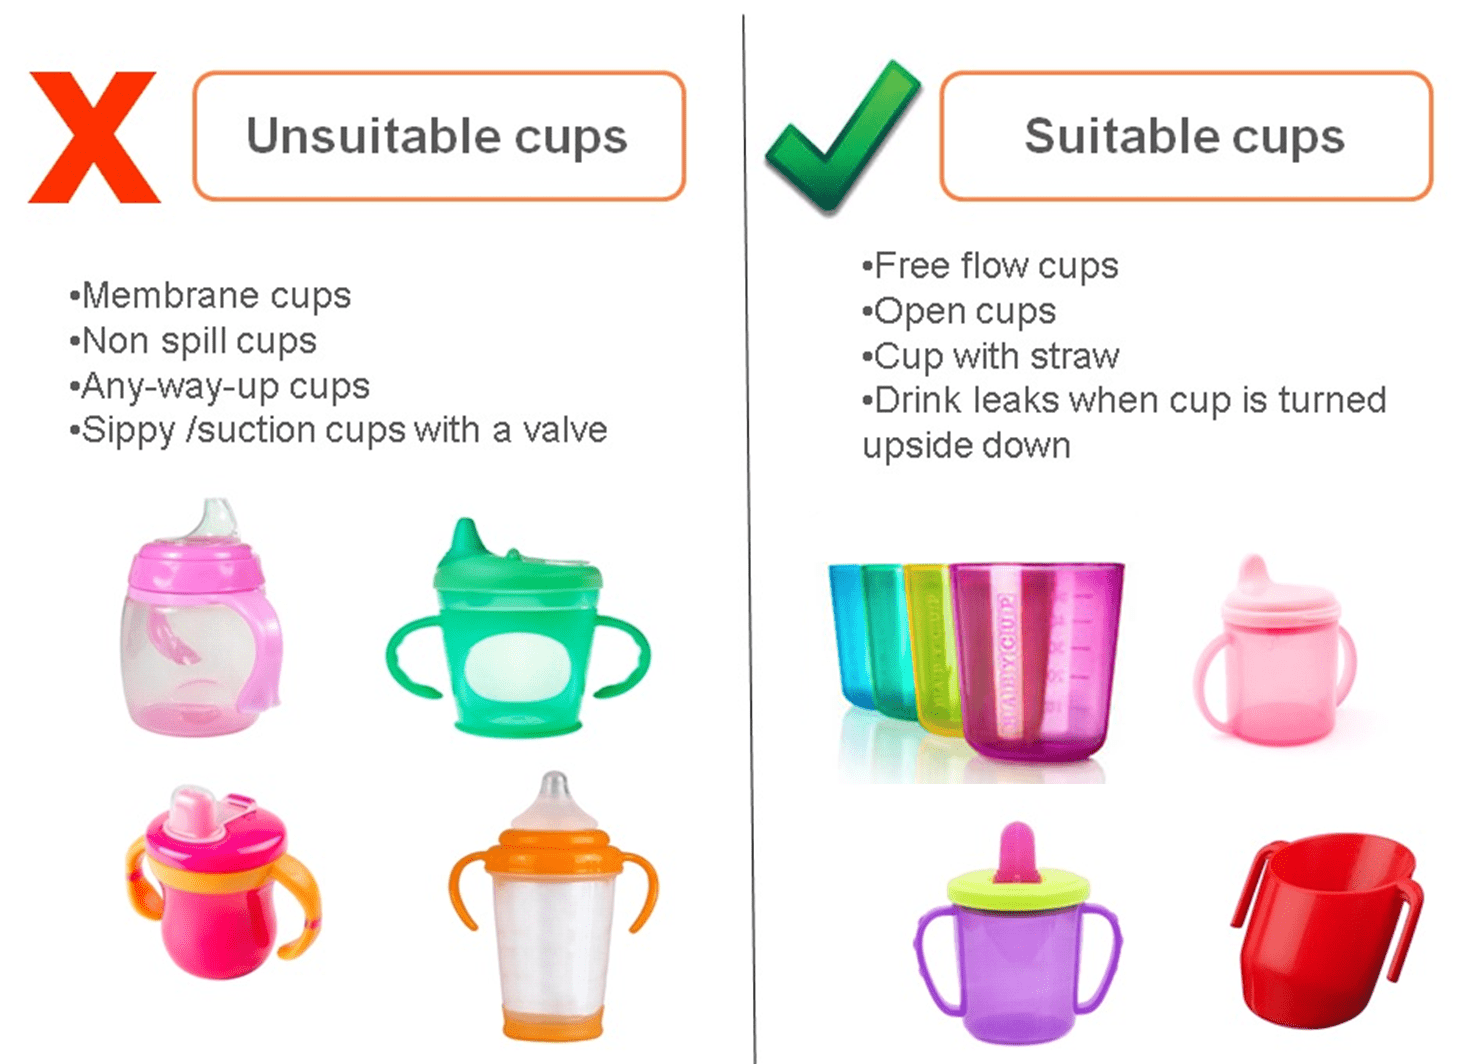 Suitable and Unsuitable cups - Suitable cups - Free flow cups, open cups, cup with straw, drink leaks when cup is turned upside down. Unsuitable cups, membrane cups, non spill cups, any-way-up cups, sippy/suction cups with a valve.